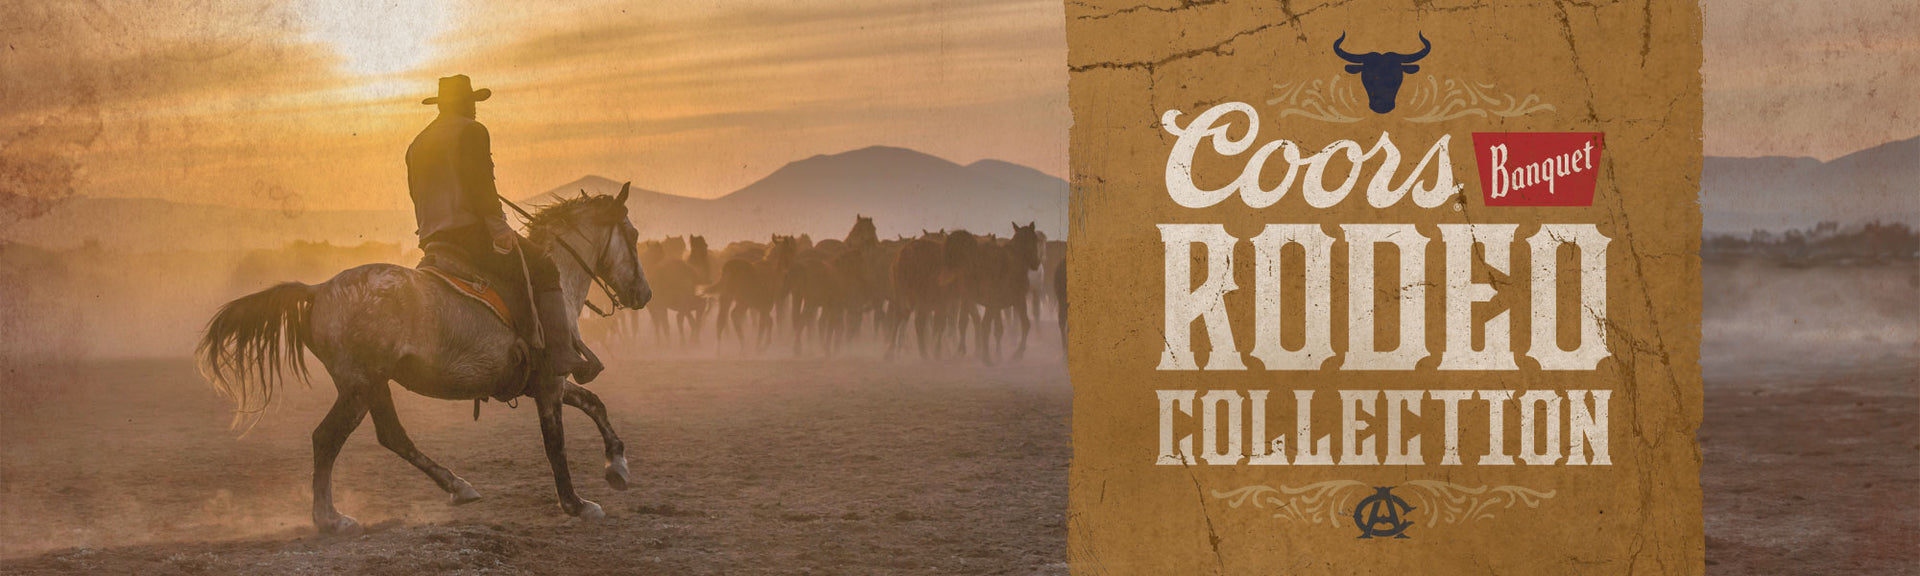 Coors Banquet Rodeo - Brew City Beer Gear